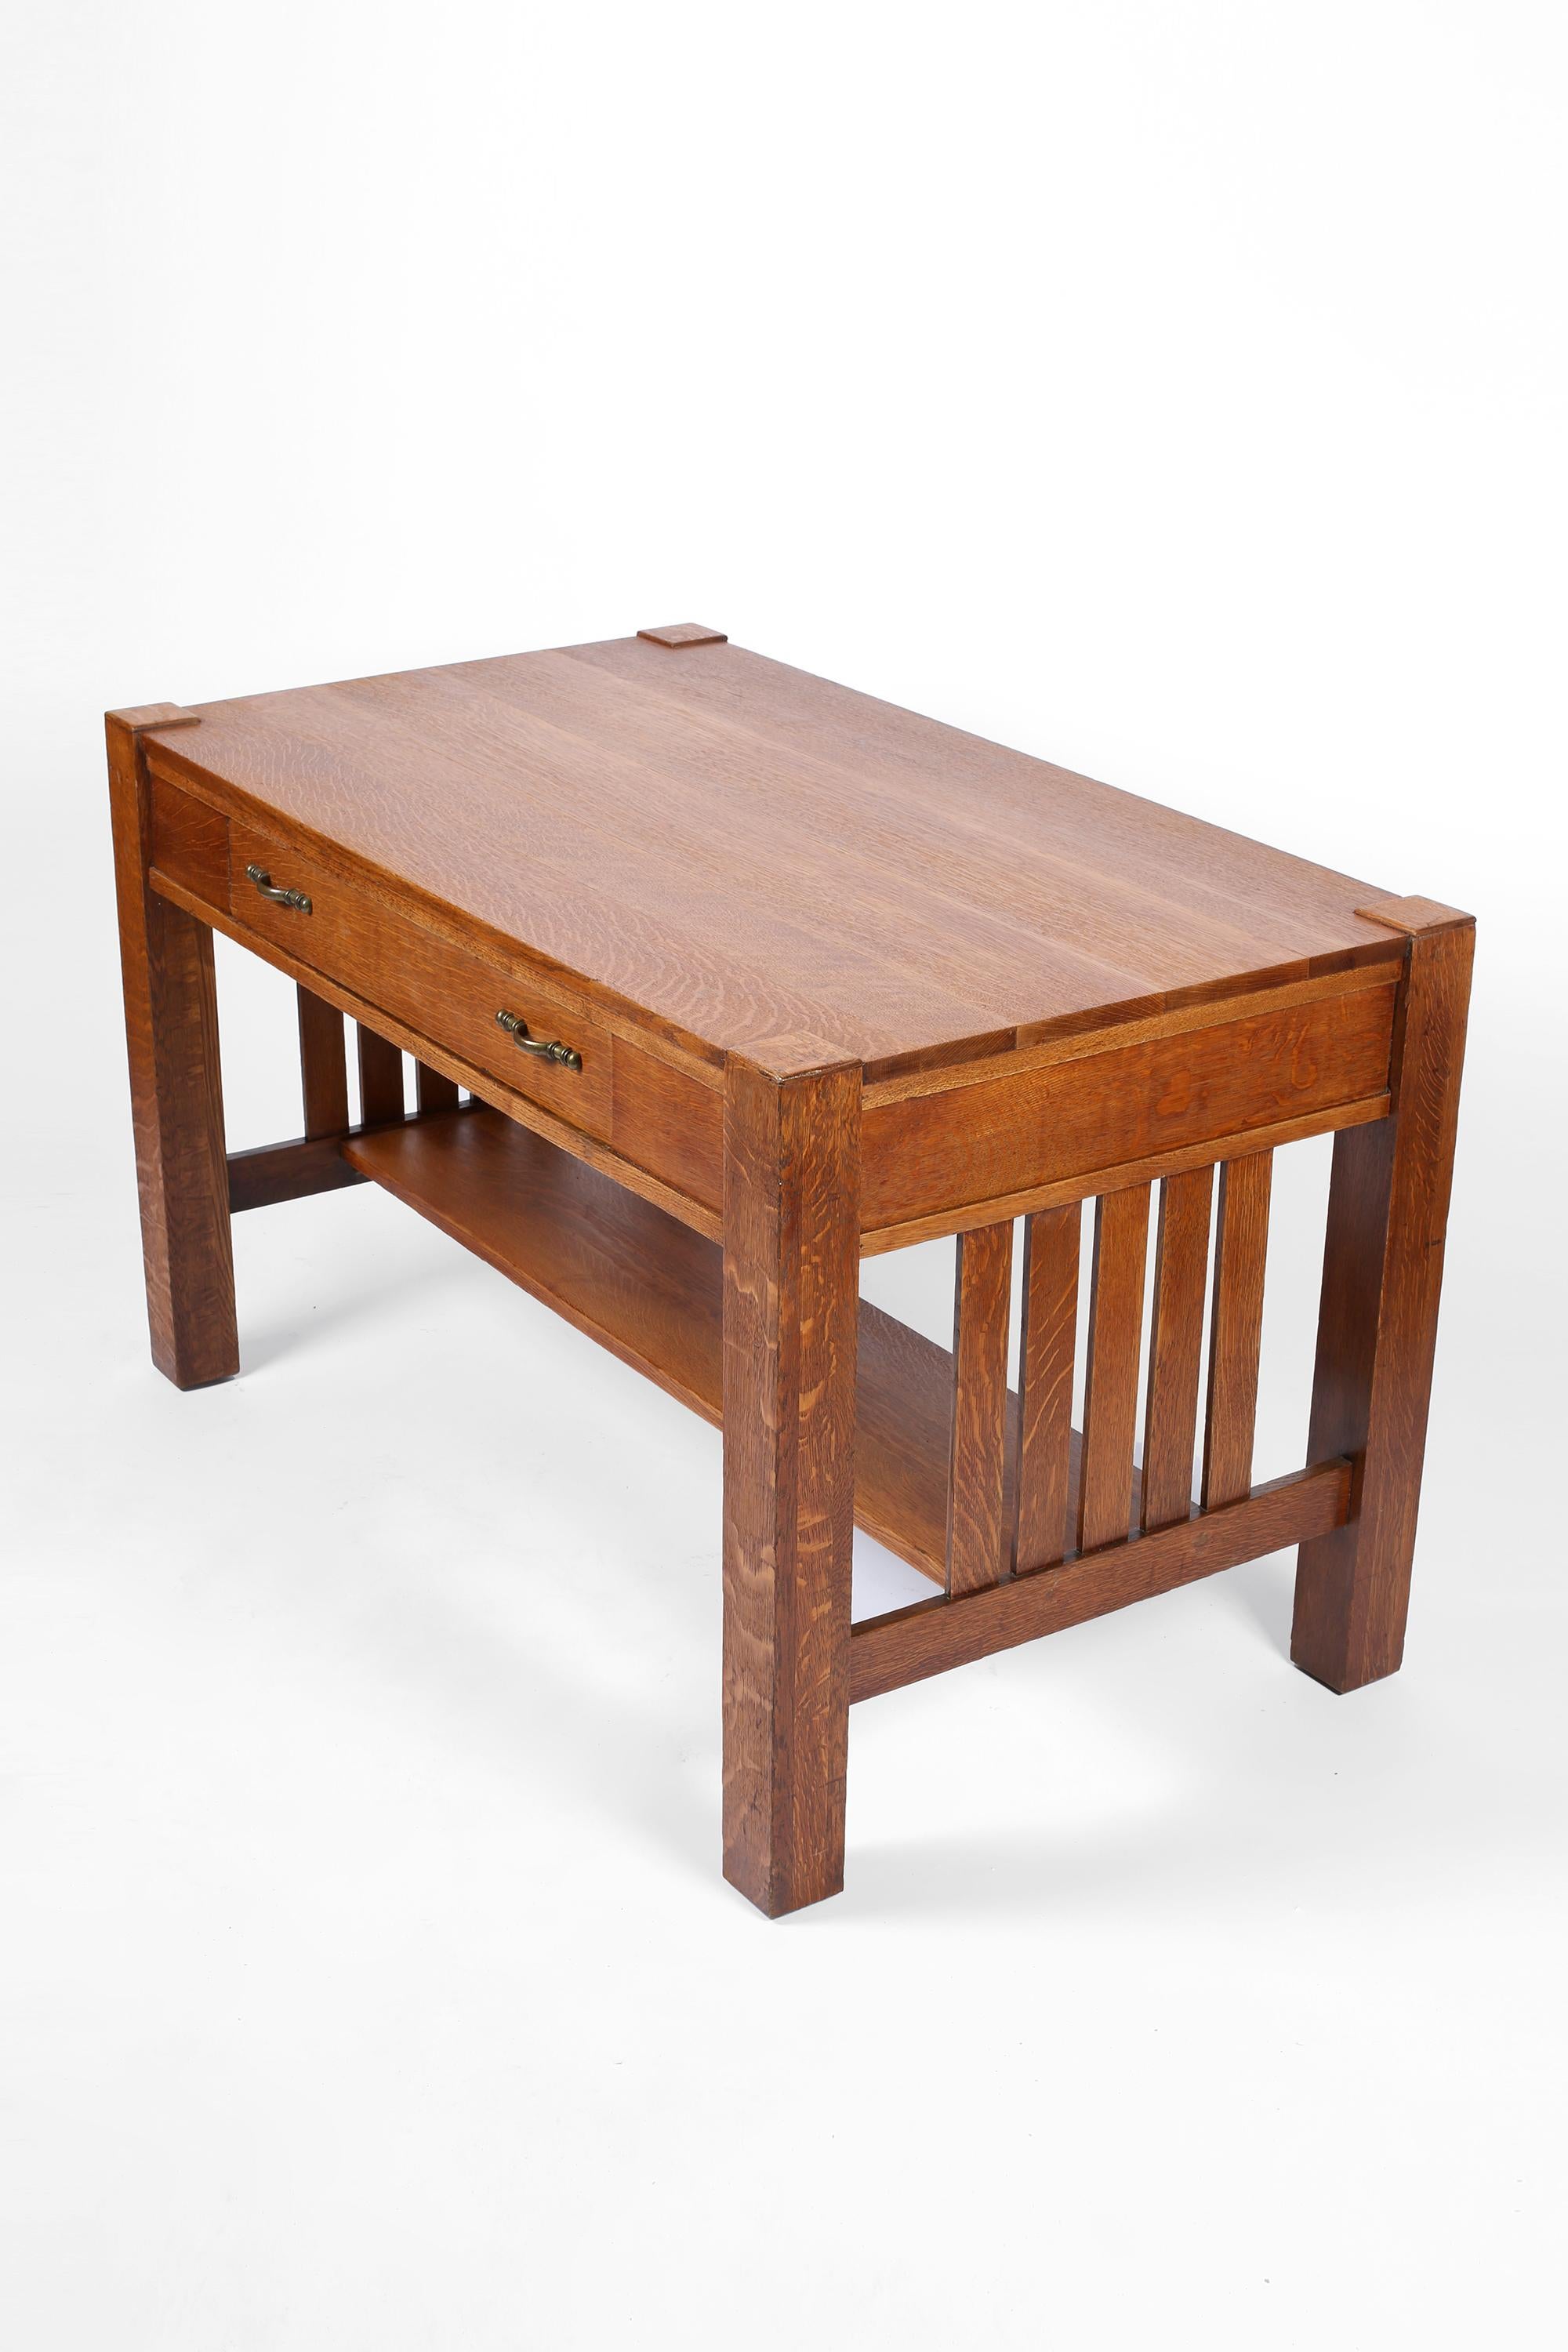 Arts and Crafts American Oak Arts & Crafts Desk circa 1900 in the Manner of Frank Lloyd Wright